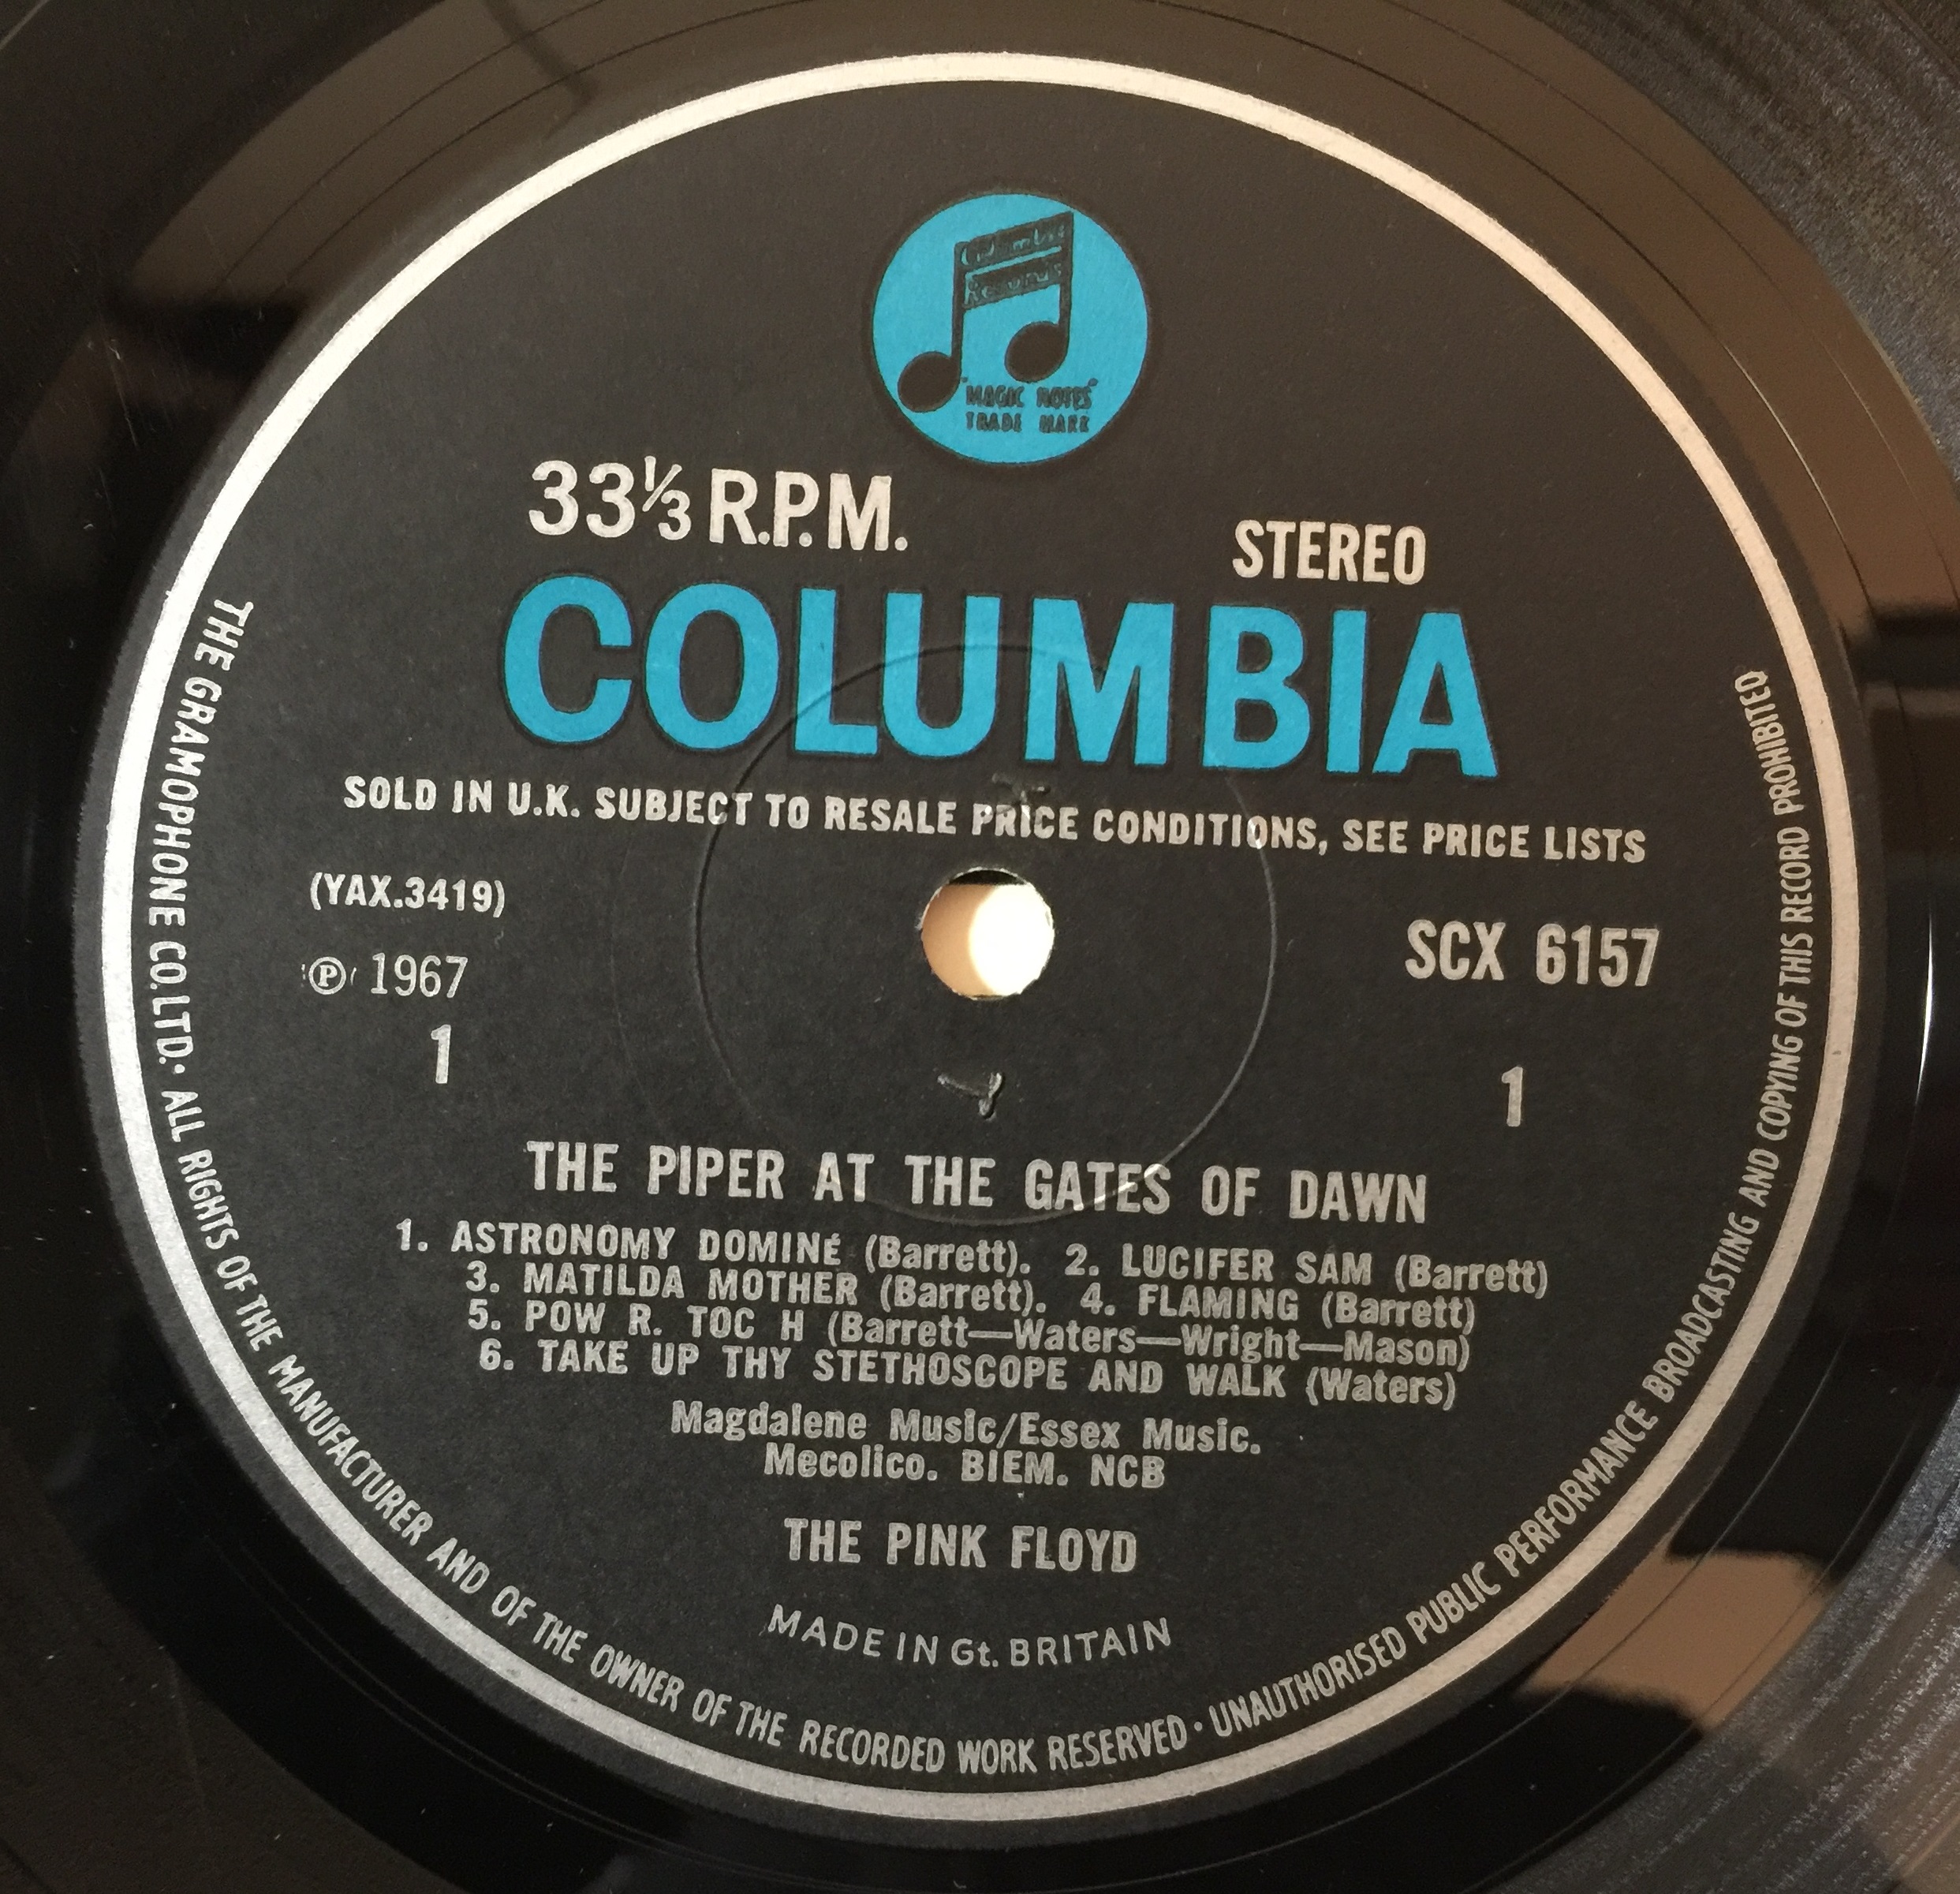 PINK FLOYD - THE PIPER AT THE GATES OF DAWN LP (ORIGINAL UK STEREO PRESSING - COLUMBIA SCX 6157). - Image 3 of 4